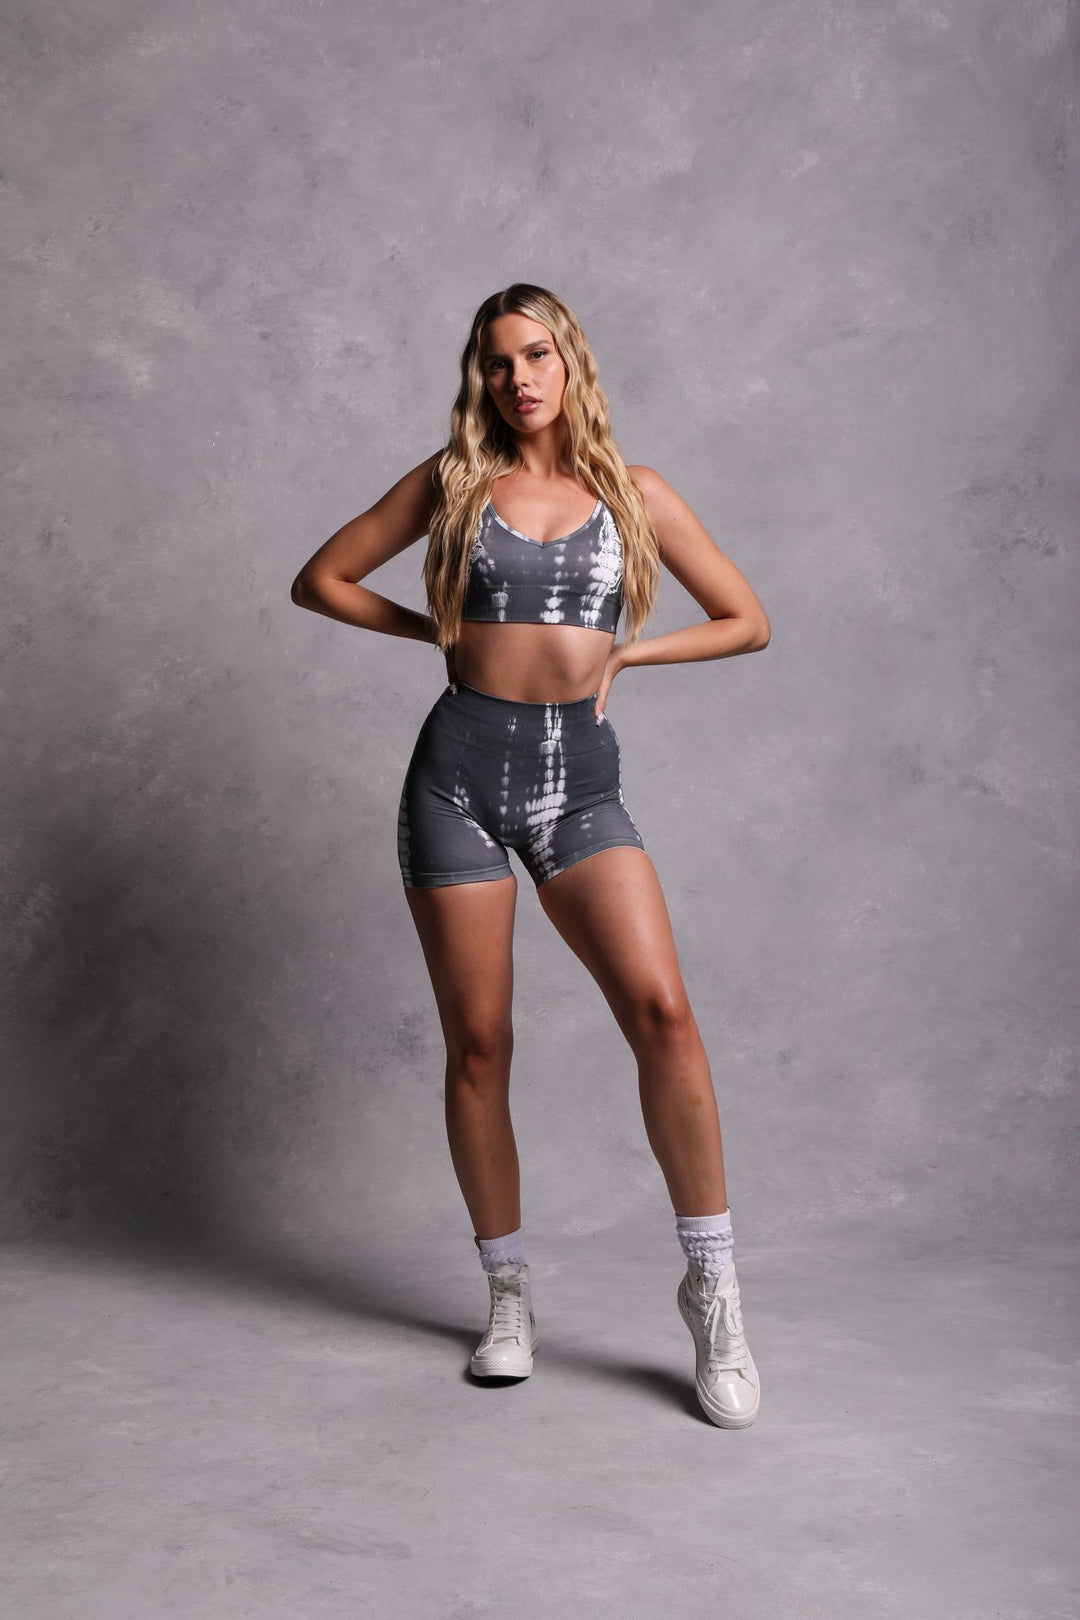 Dual "Everson Seamless" Sports Bra in Wolf Gray Serpent